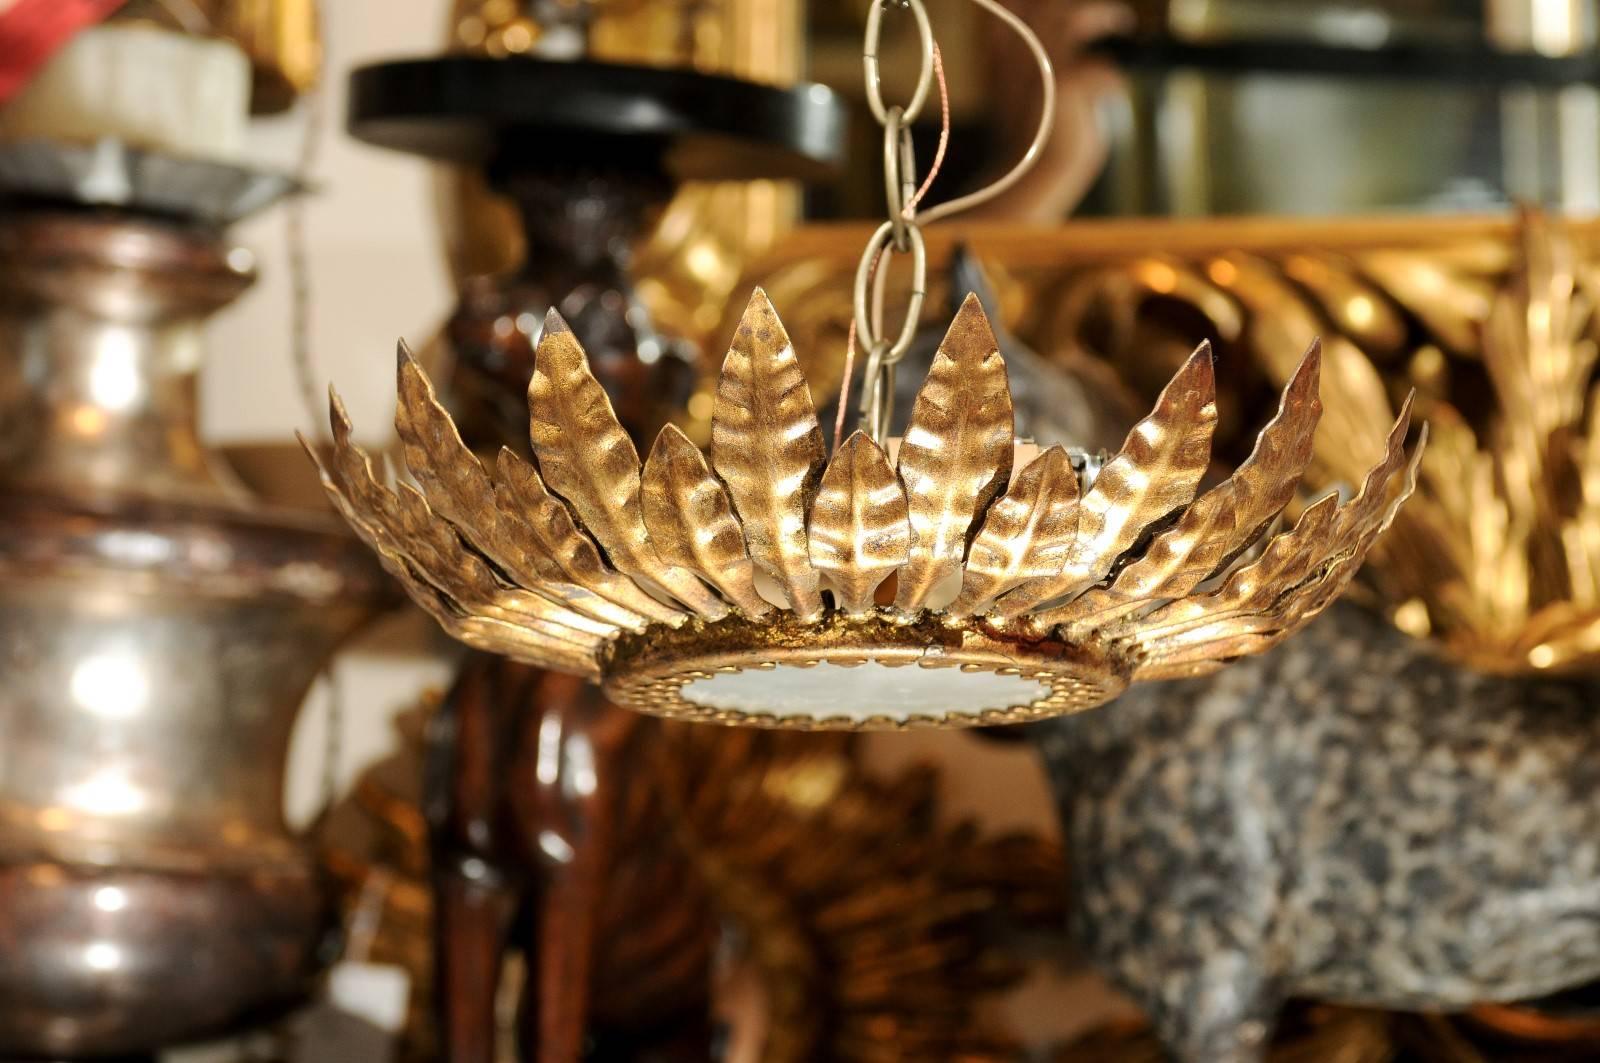 This petite Spanish mid-20th century crown semi-flush chandelier is made of gilt metal and frosted glass at the bottom. The surround is adorned with leaf motifs of two different sizes, curving towards the centre of the light fixture. The two lights